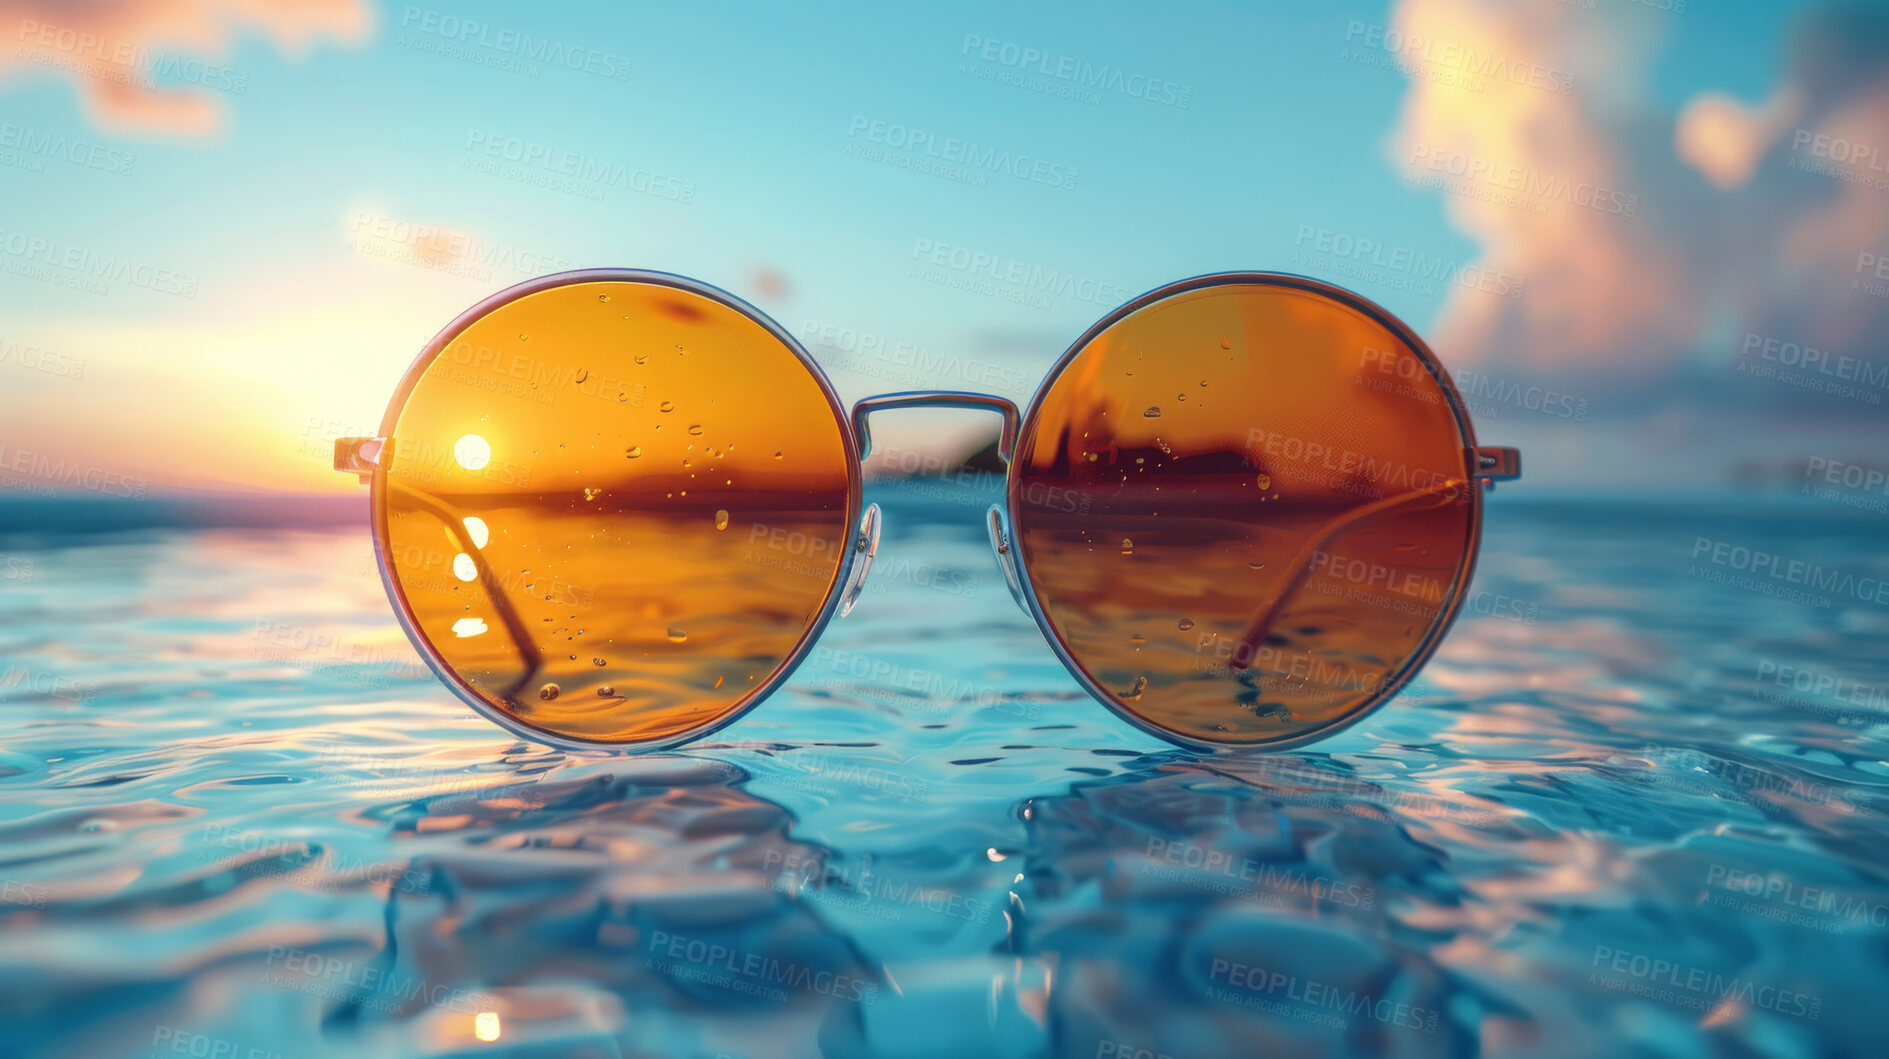 Buy stock photo Glasses, water and sunset with beach landscape or blue sky. Tropical paradise, dream holiday or island vacation. Background, summer wallpaper and relaxation in nature, sun and blue sea waves